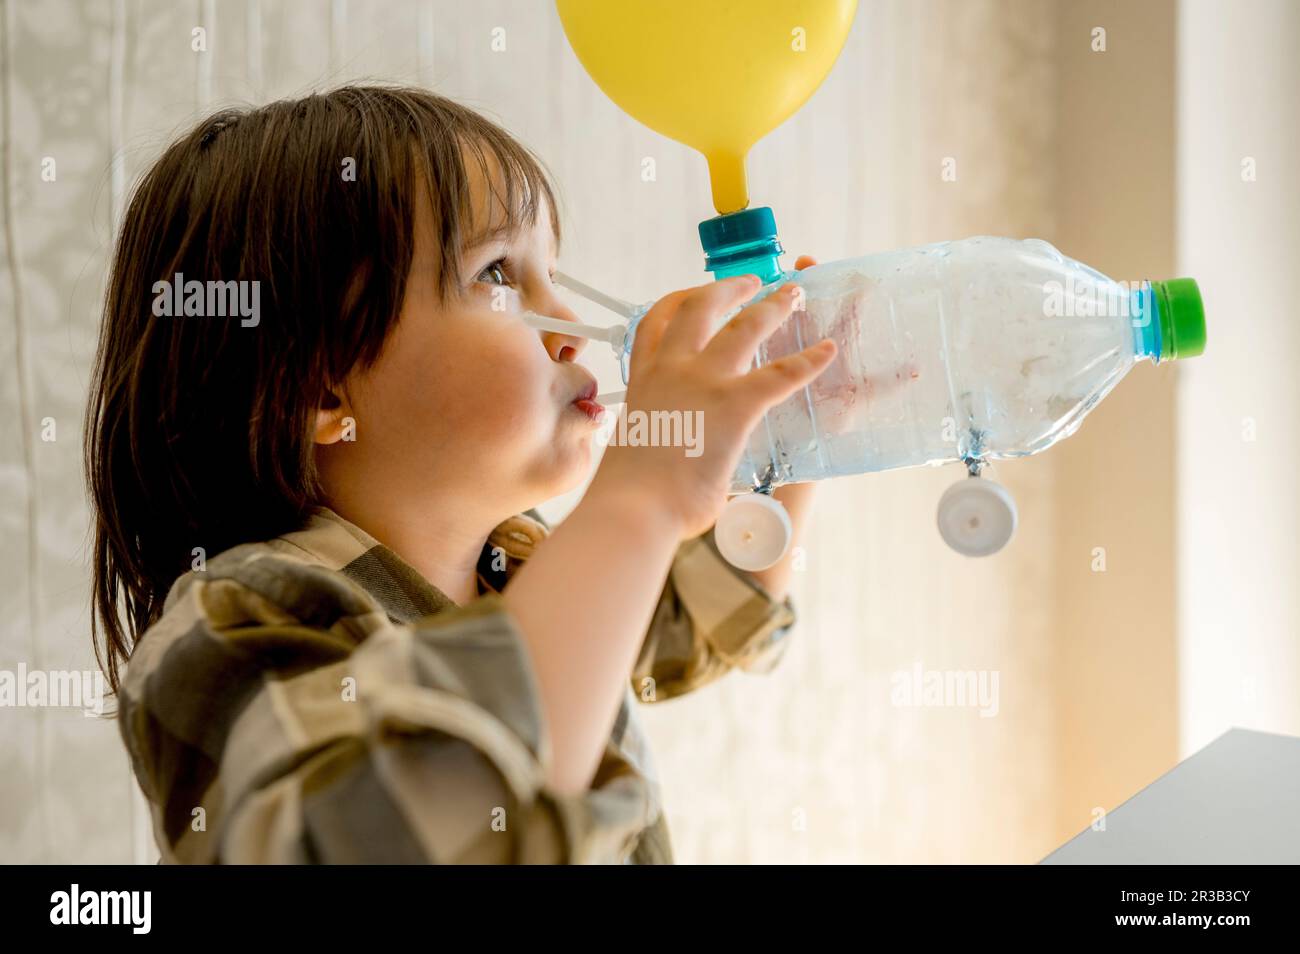 Boy blowing balloon using plastic bottle car at home Stock Photo